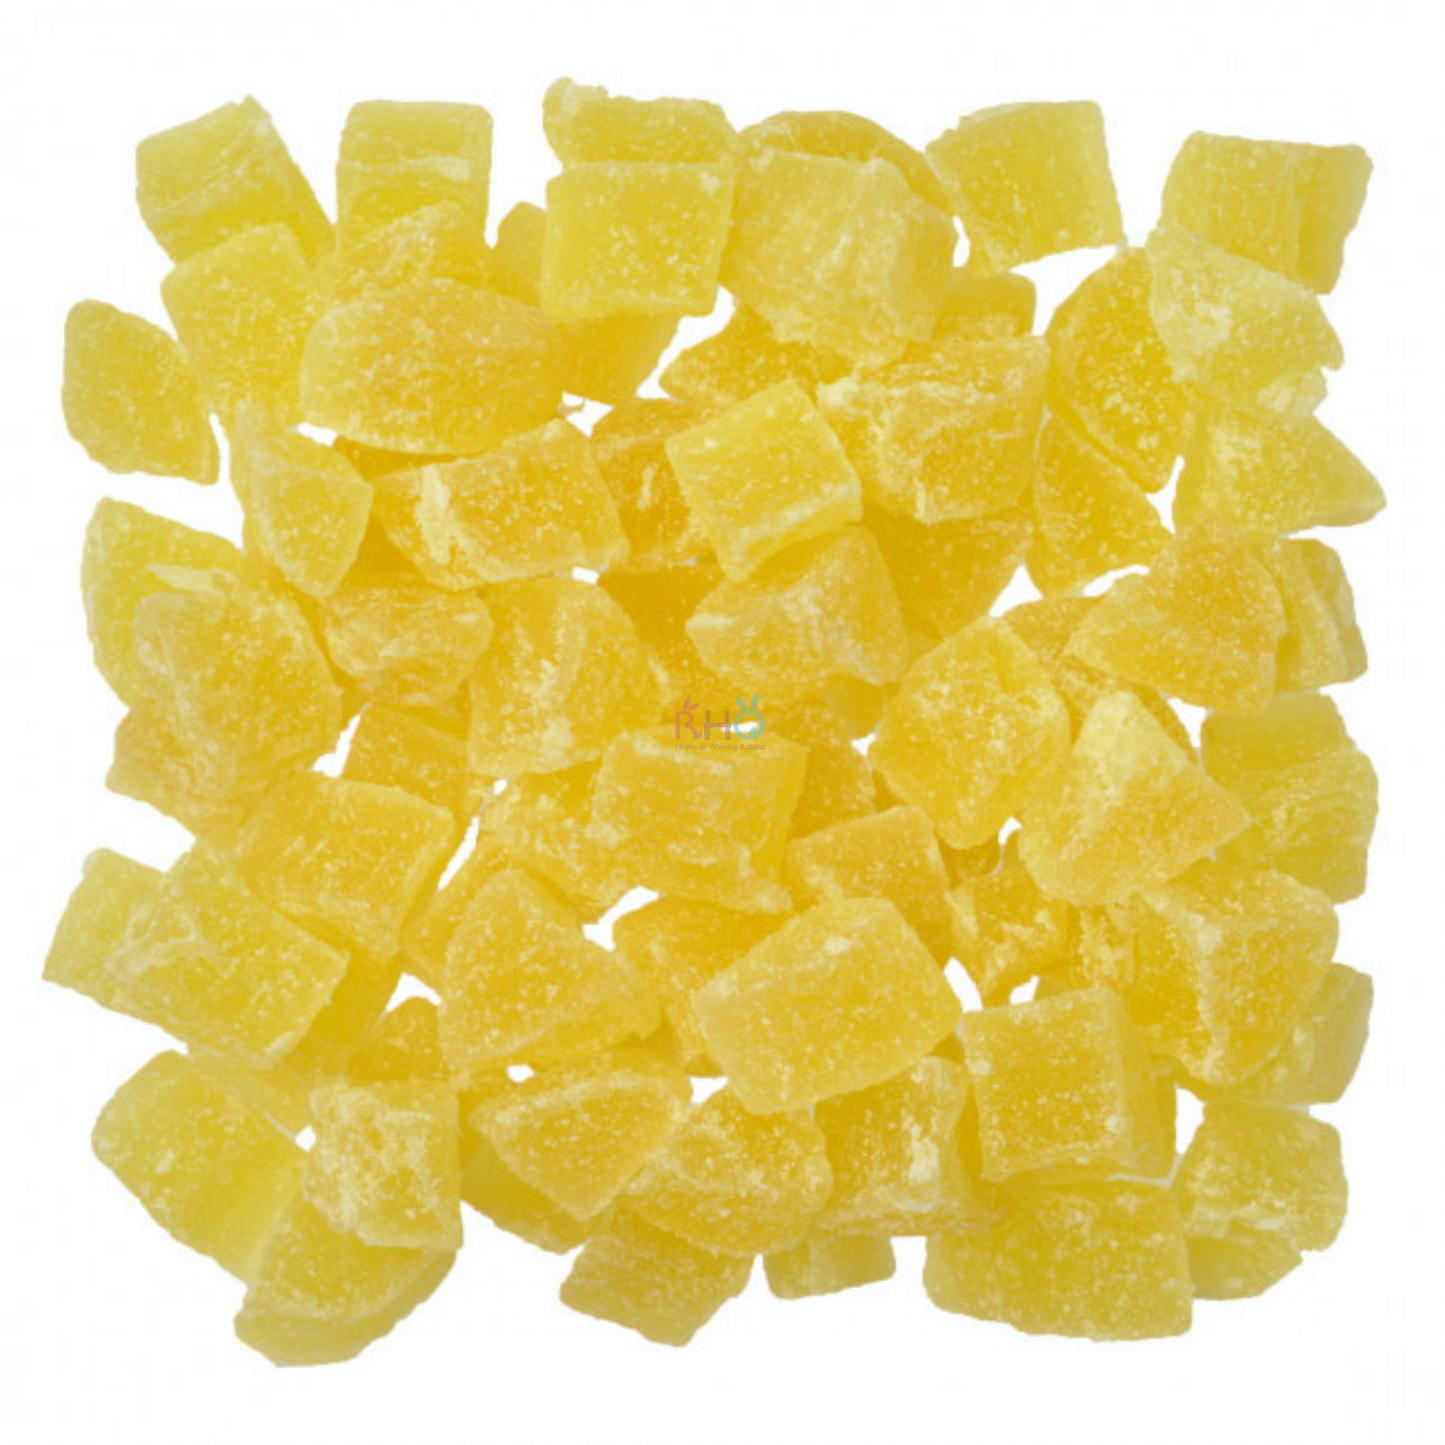 KW Cages Bunny Cubes Dried Pineapple Cubes 6oz